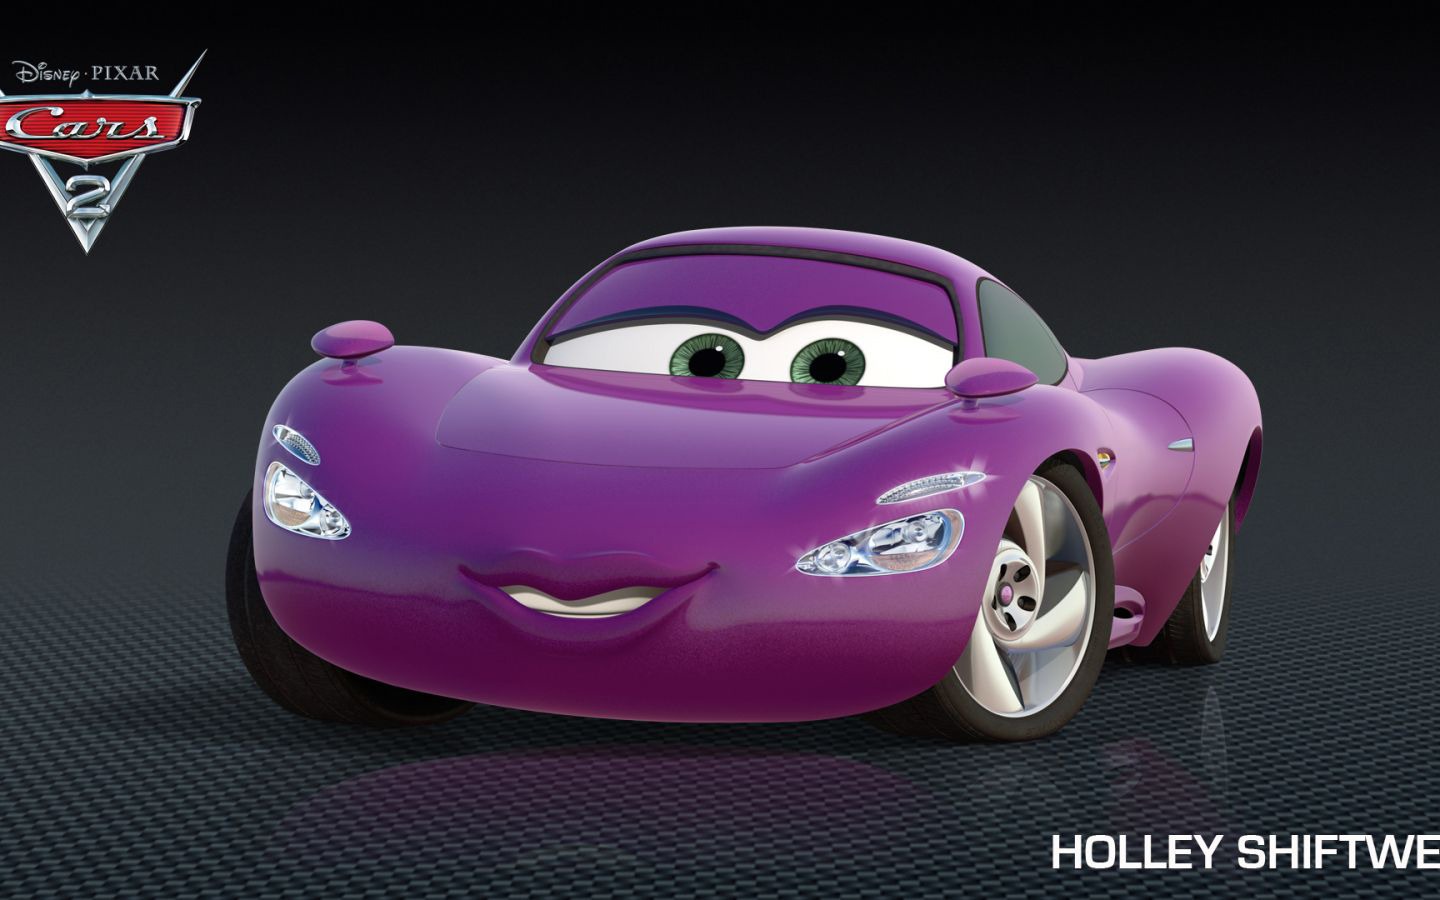 Cars 2 wallpapers #19 - 1440x900